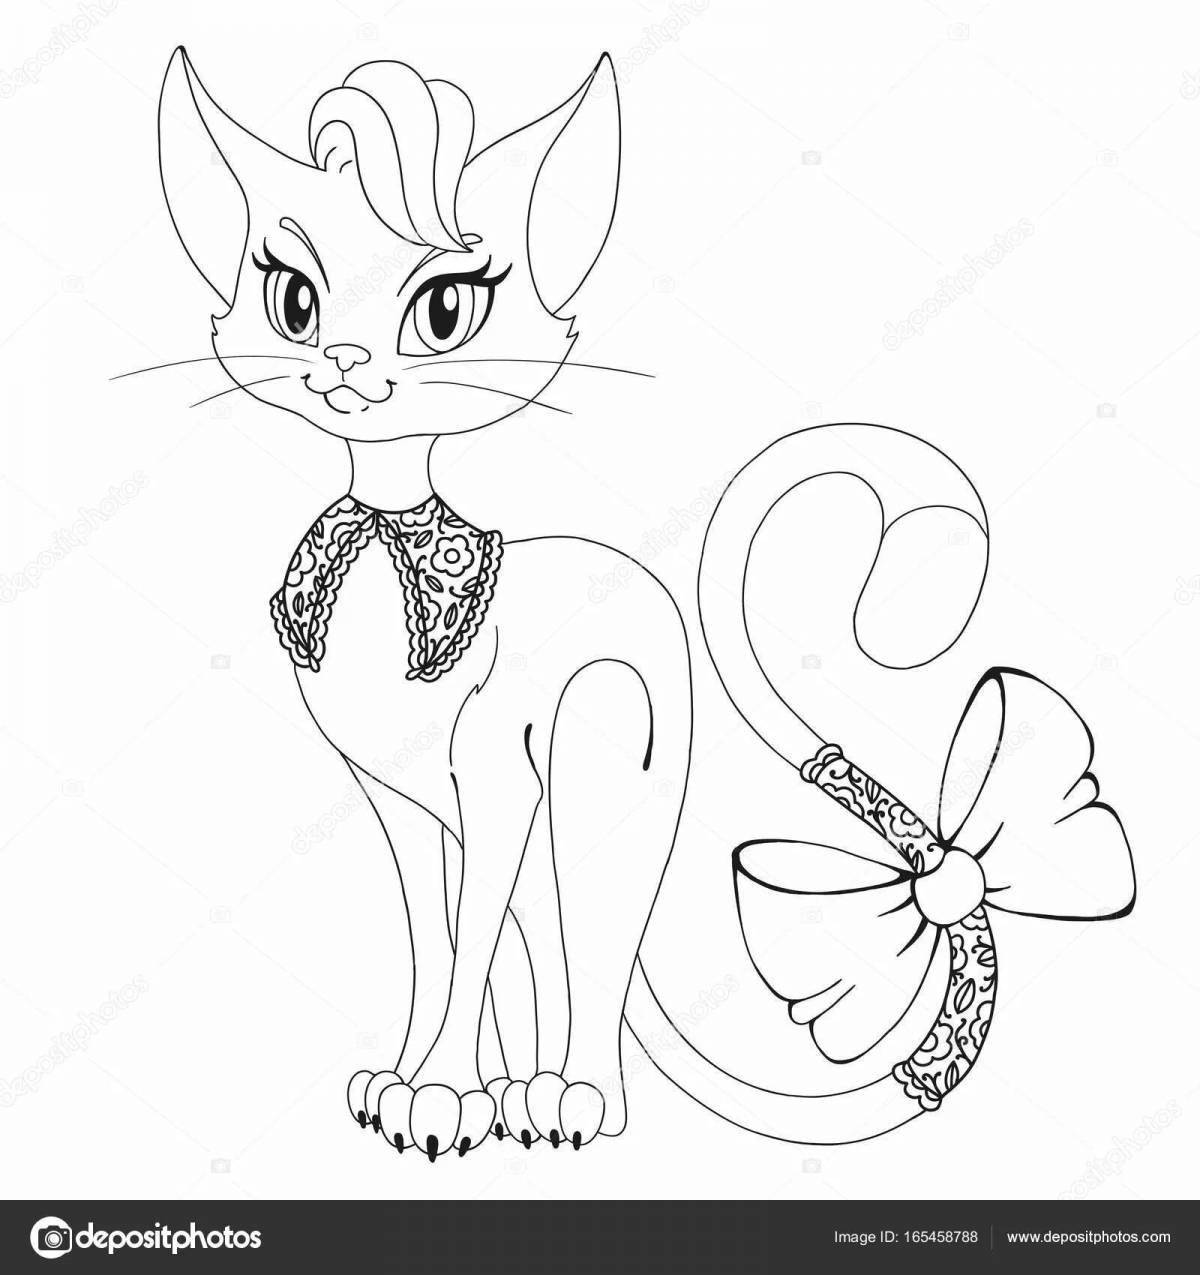 Delightful coloring kitty with a bow